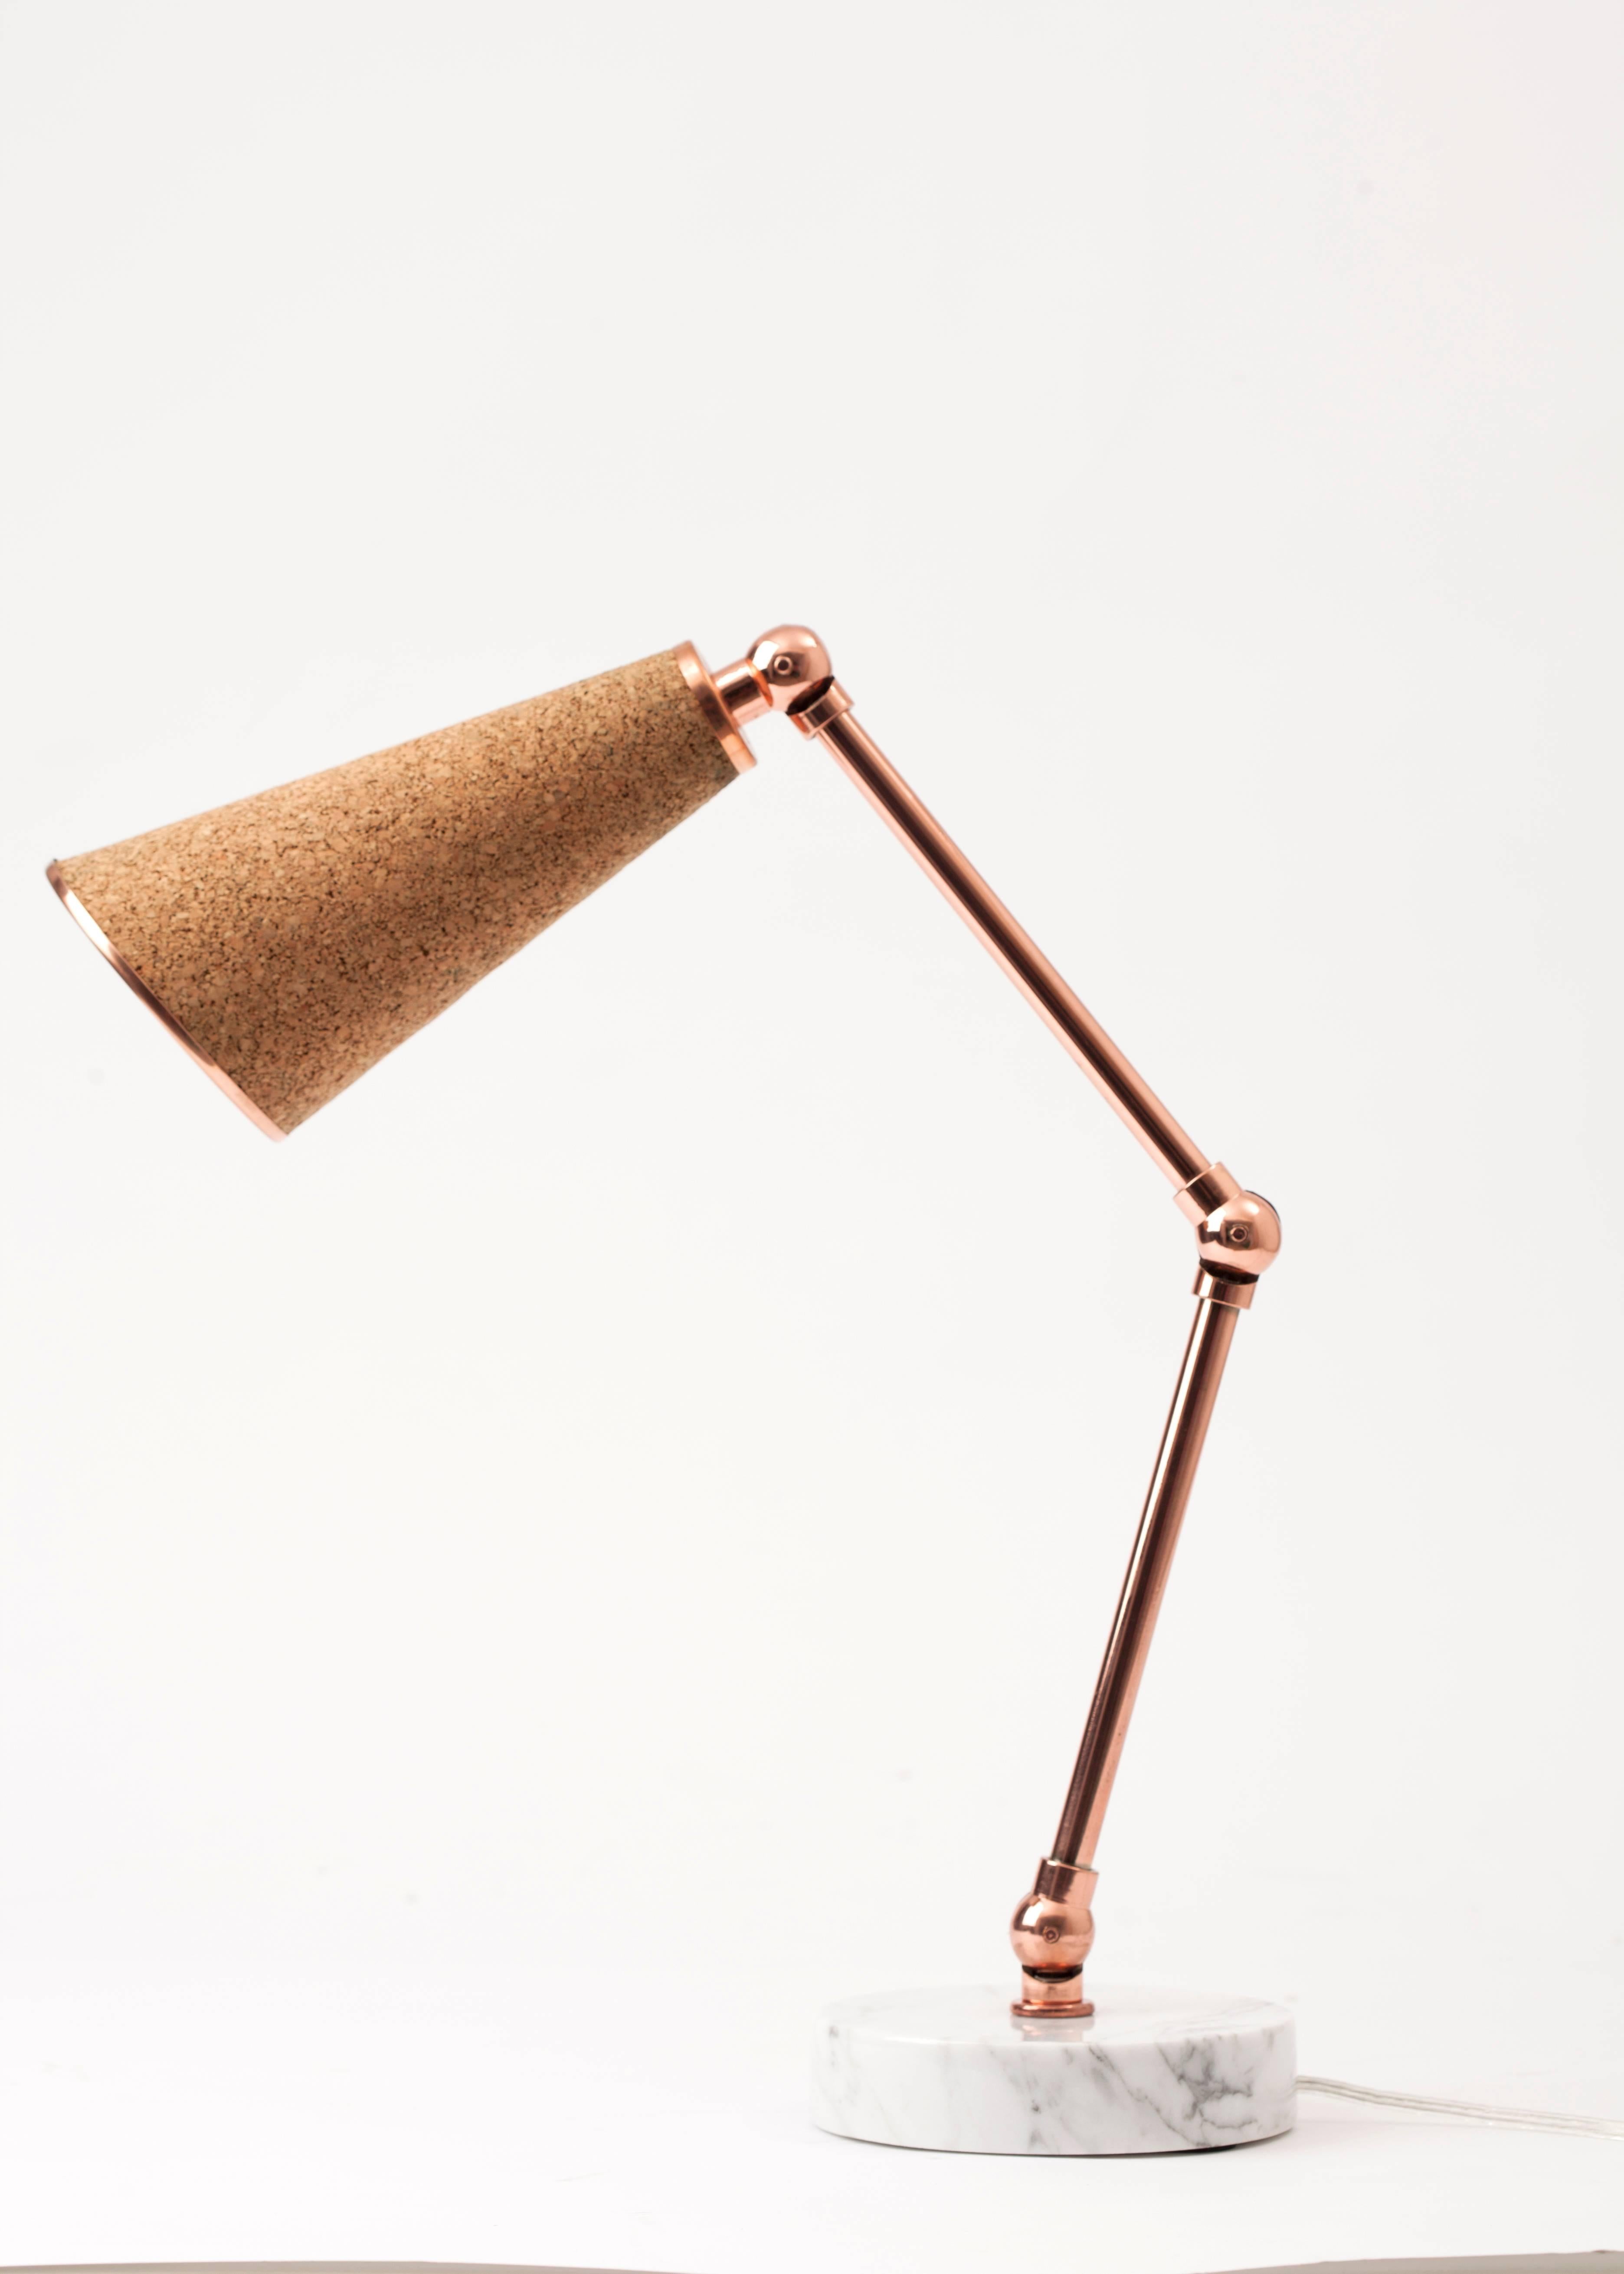 Lanterna Table Lamp in Carrara Marble, Cork and Copper with Adjustable Arms  im Angebot 1